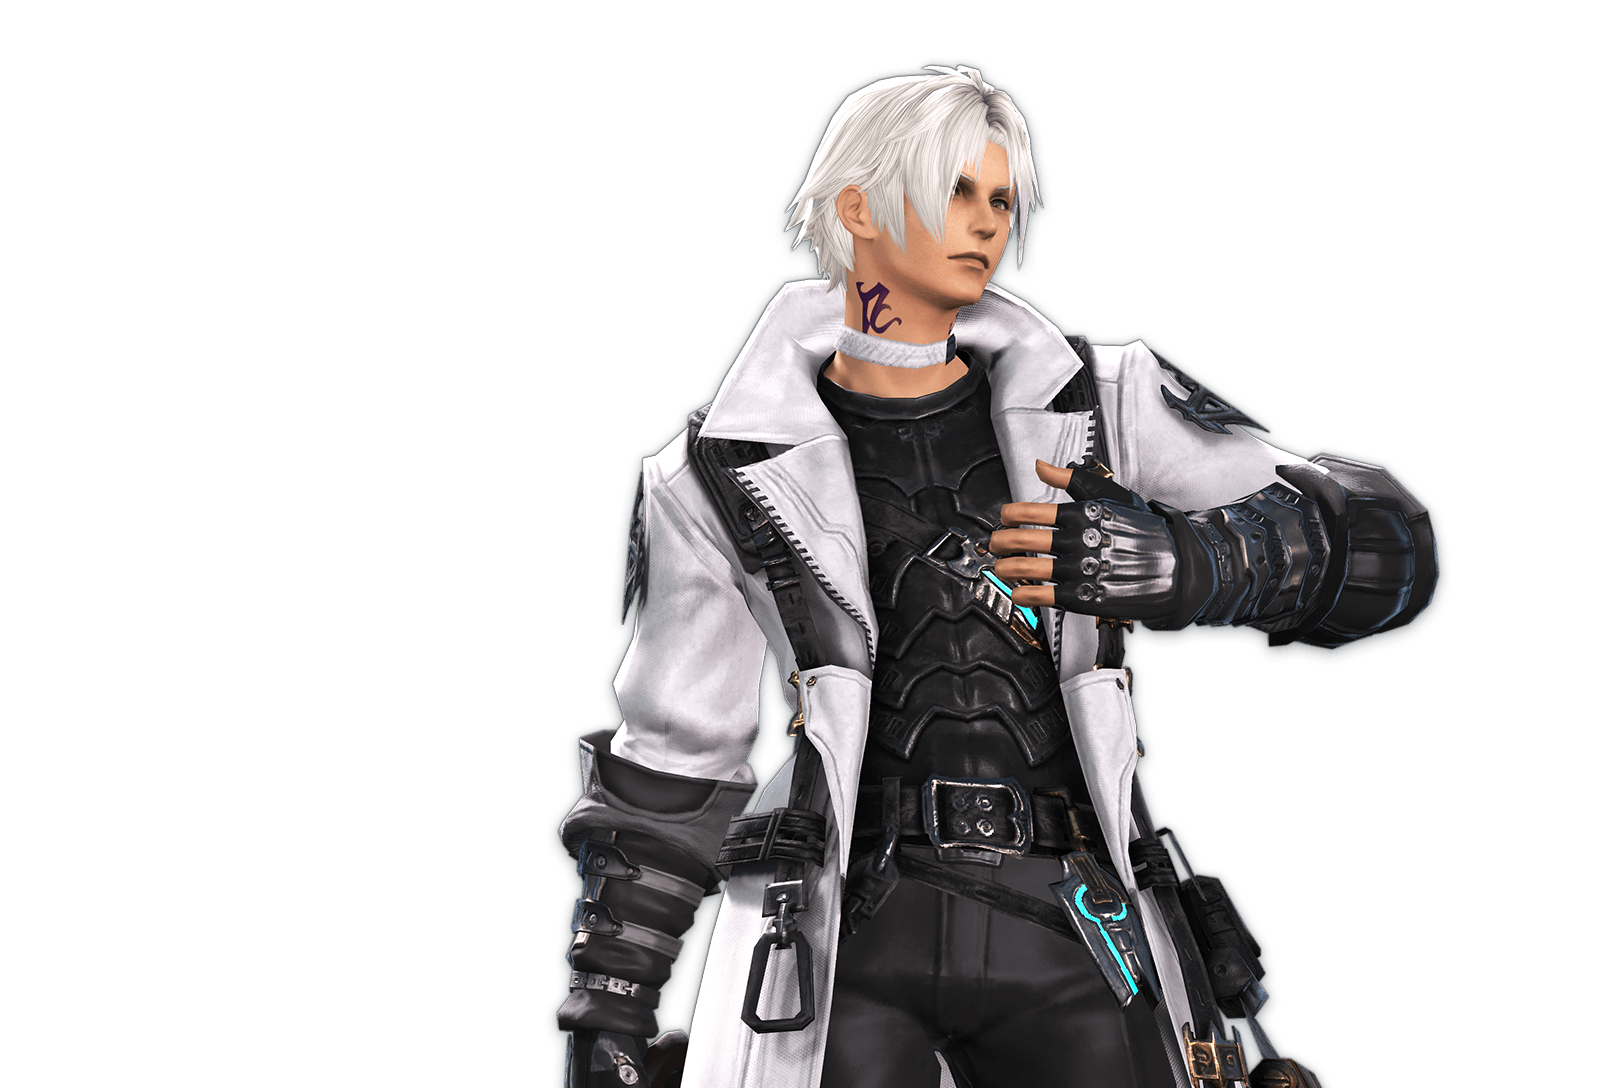 Thancred